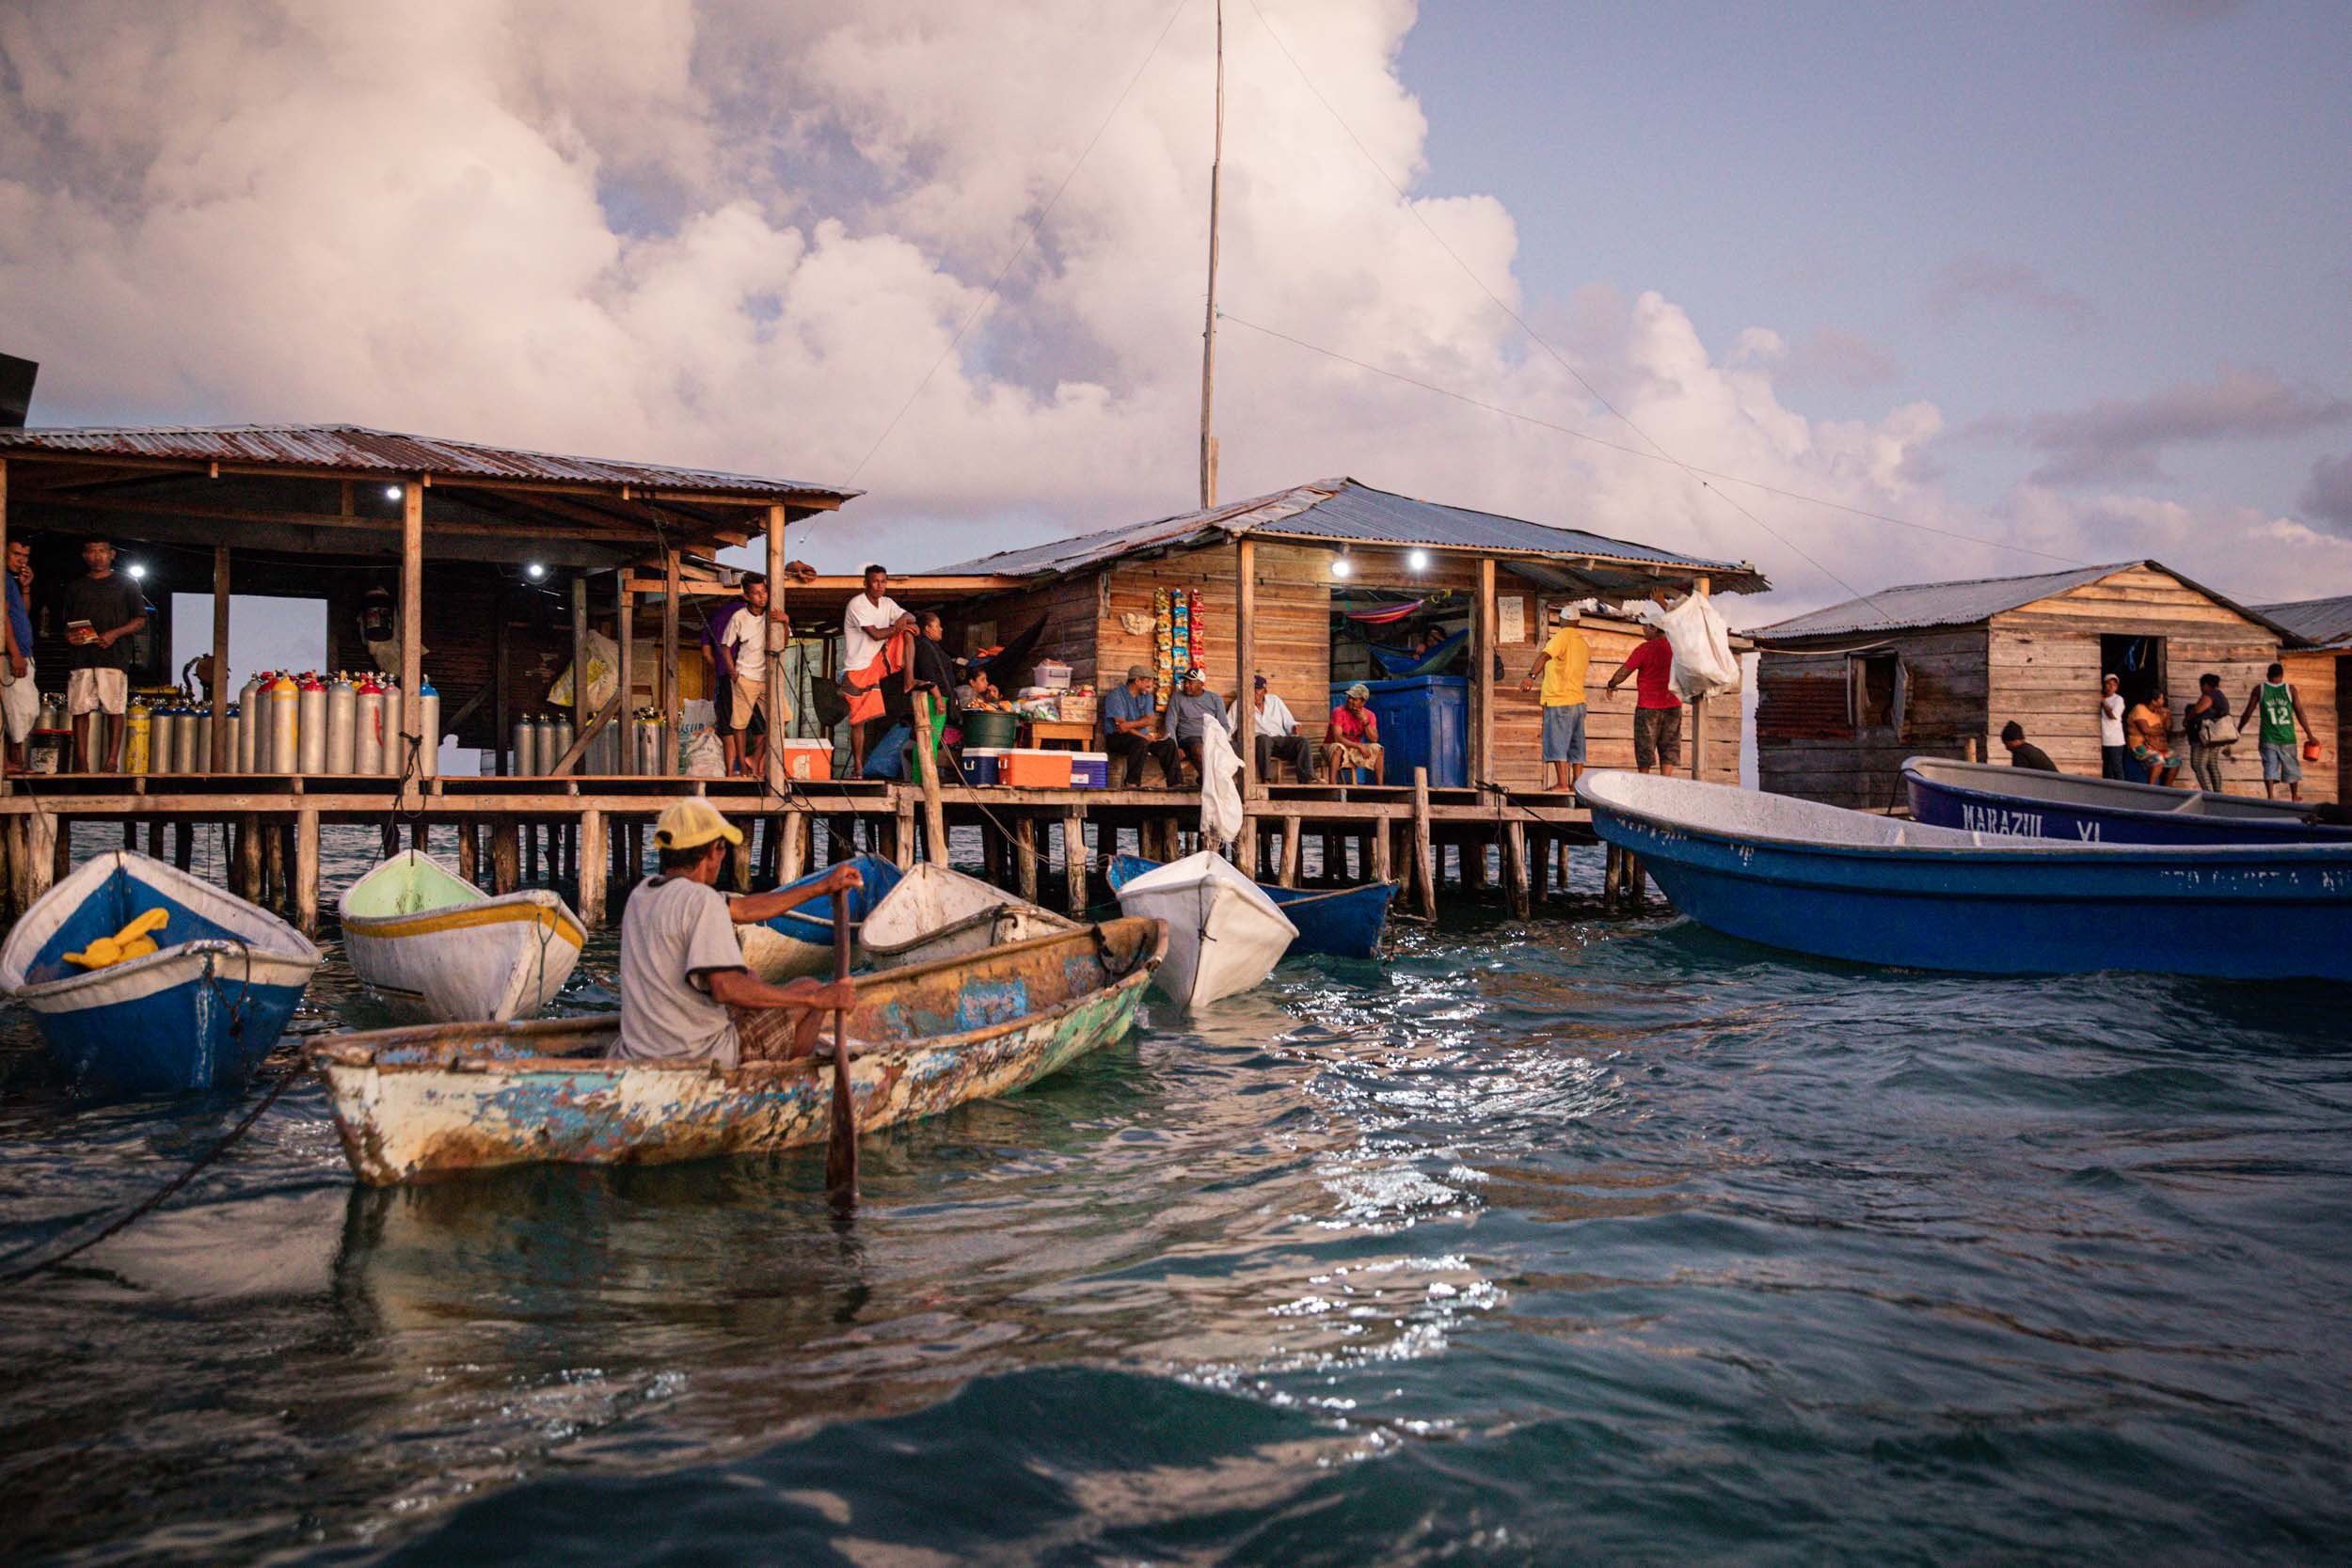  A fishing community approximately 60 miles off the coast of Nicaragua, where some divers live and work. 